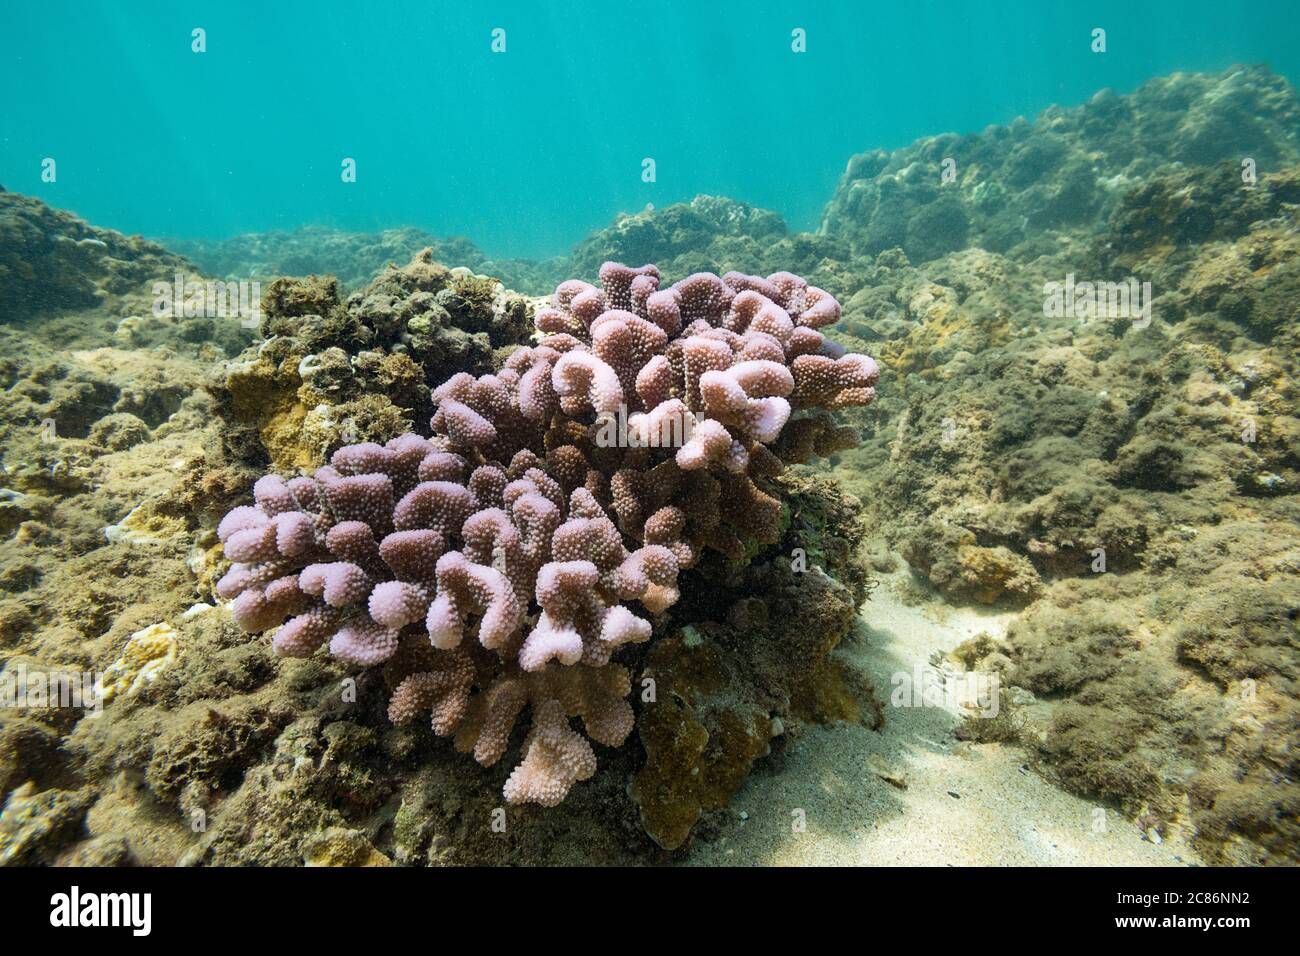 bleaching colony of cauliflower coral, Pocillopora meandrina, showing protective fluorescent colors, Honokeana Cove, West Maui, Hawaii, USA Stock Photo